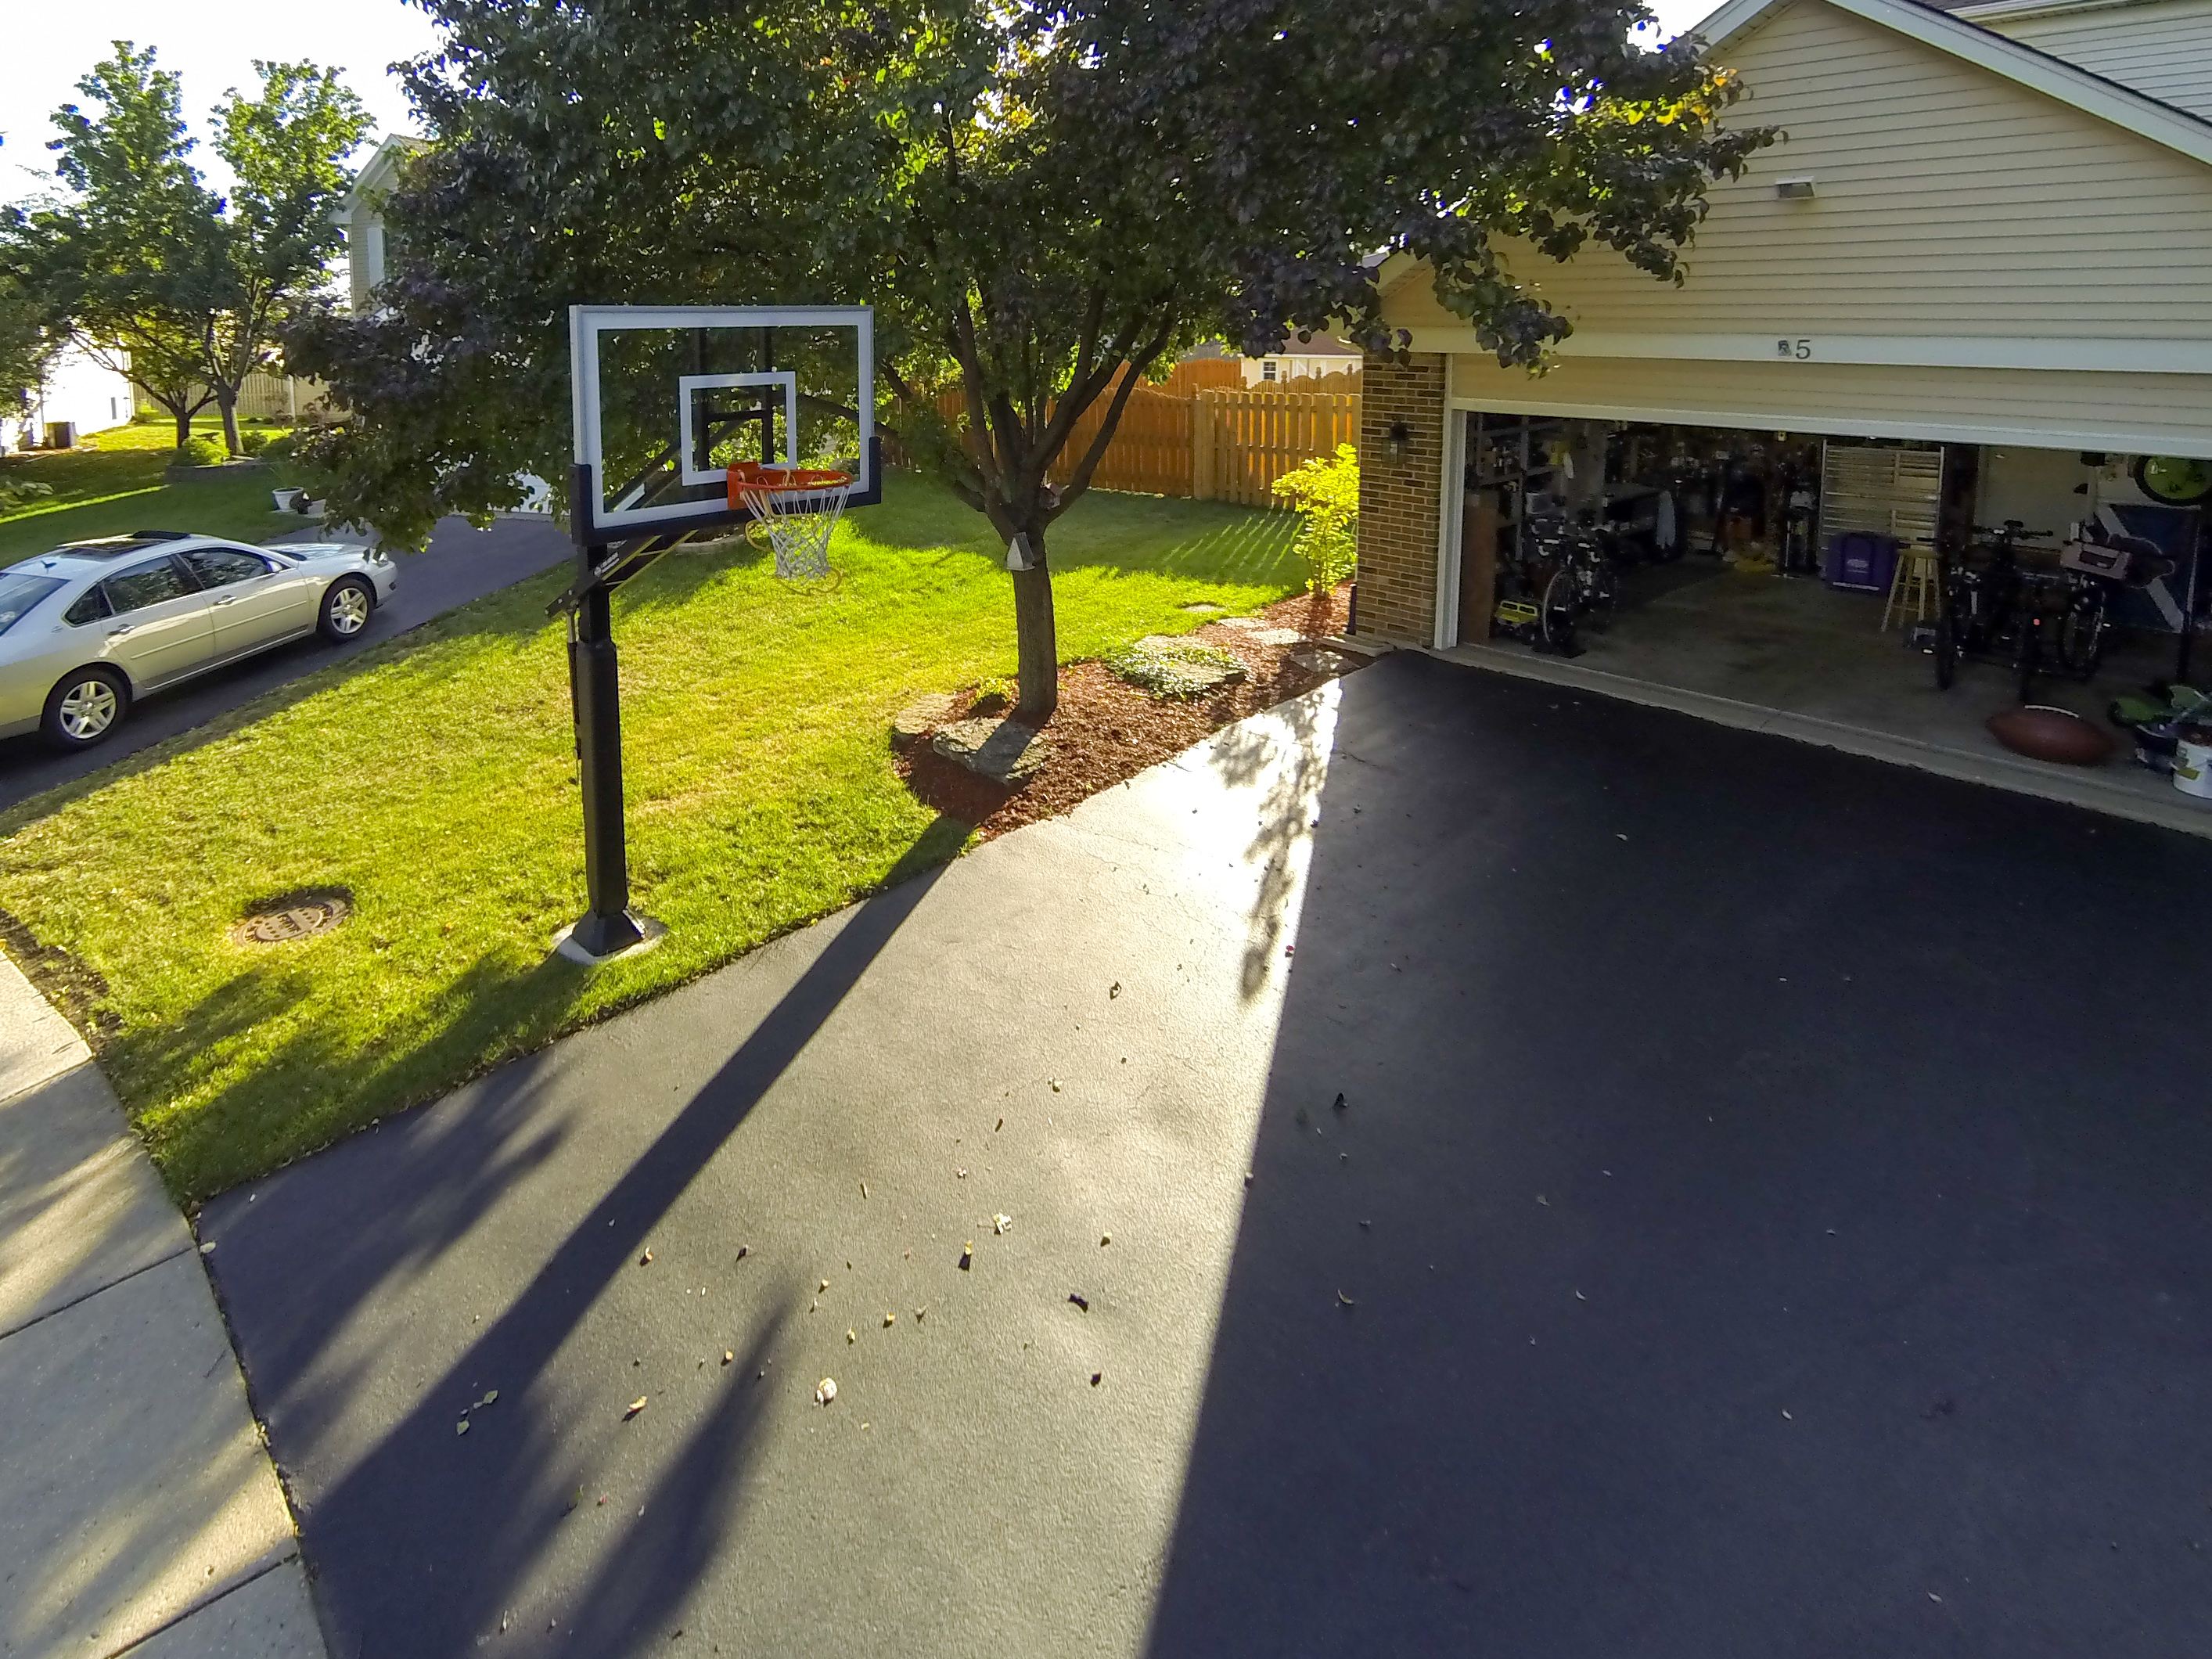 The Pro Dunk Gold sits next to a typical two car garage using the asphalt driveway as great playing area. 